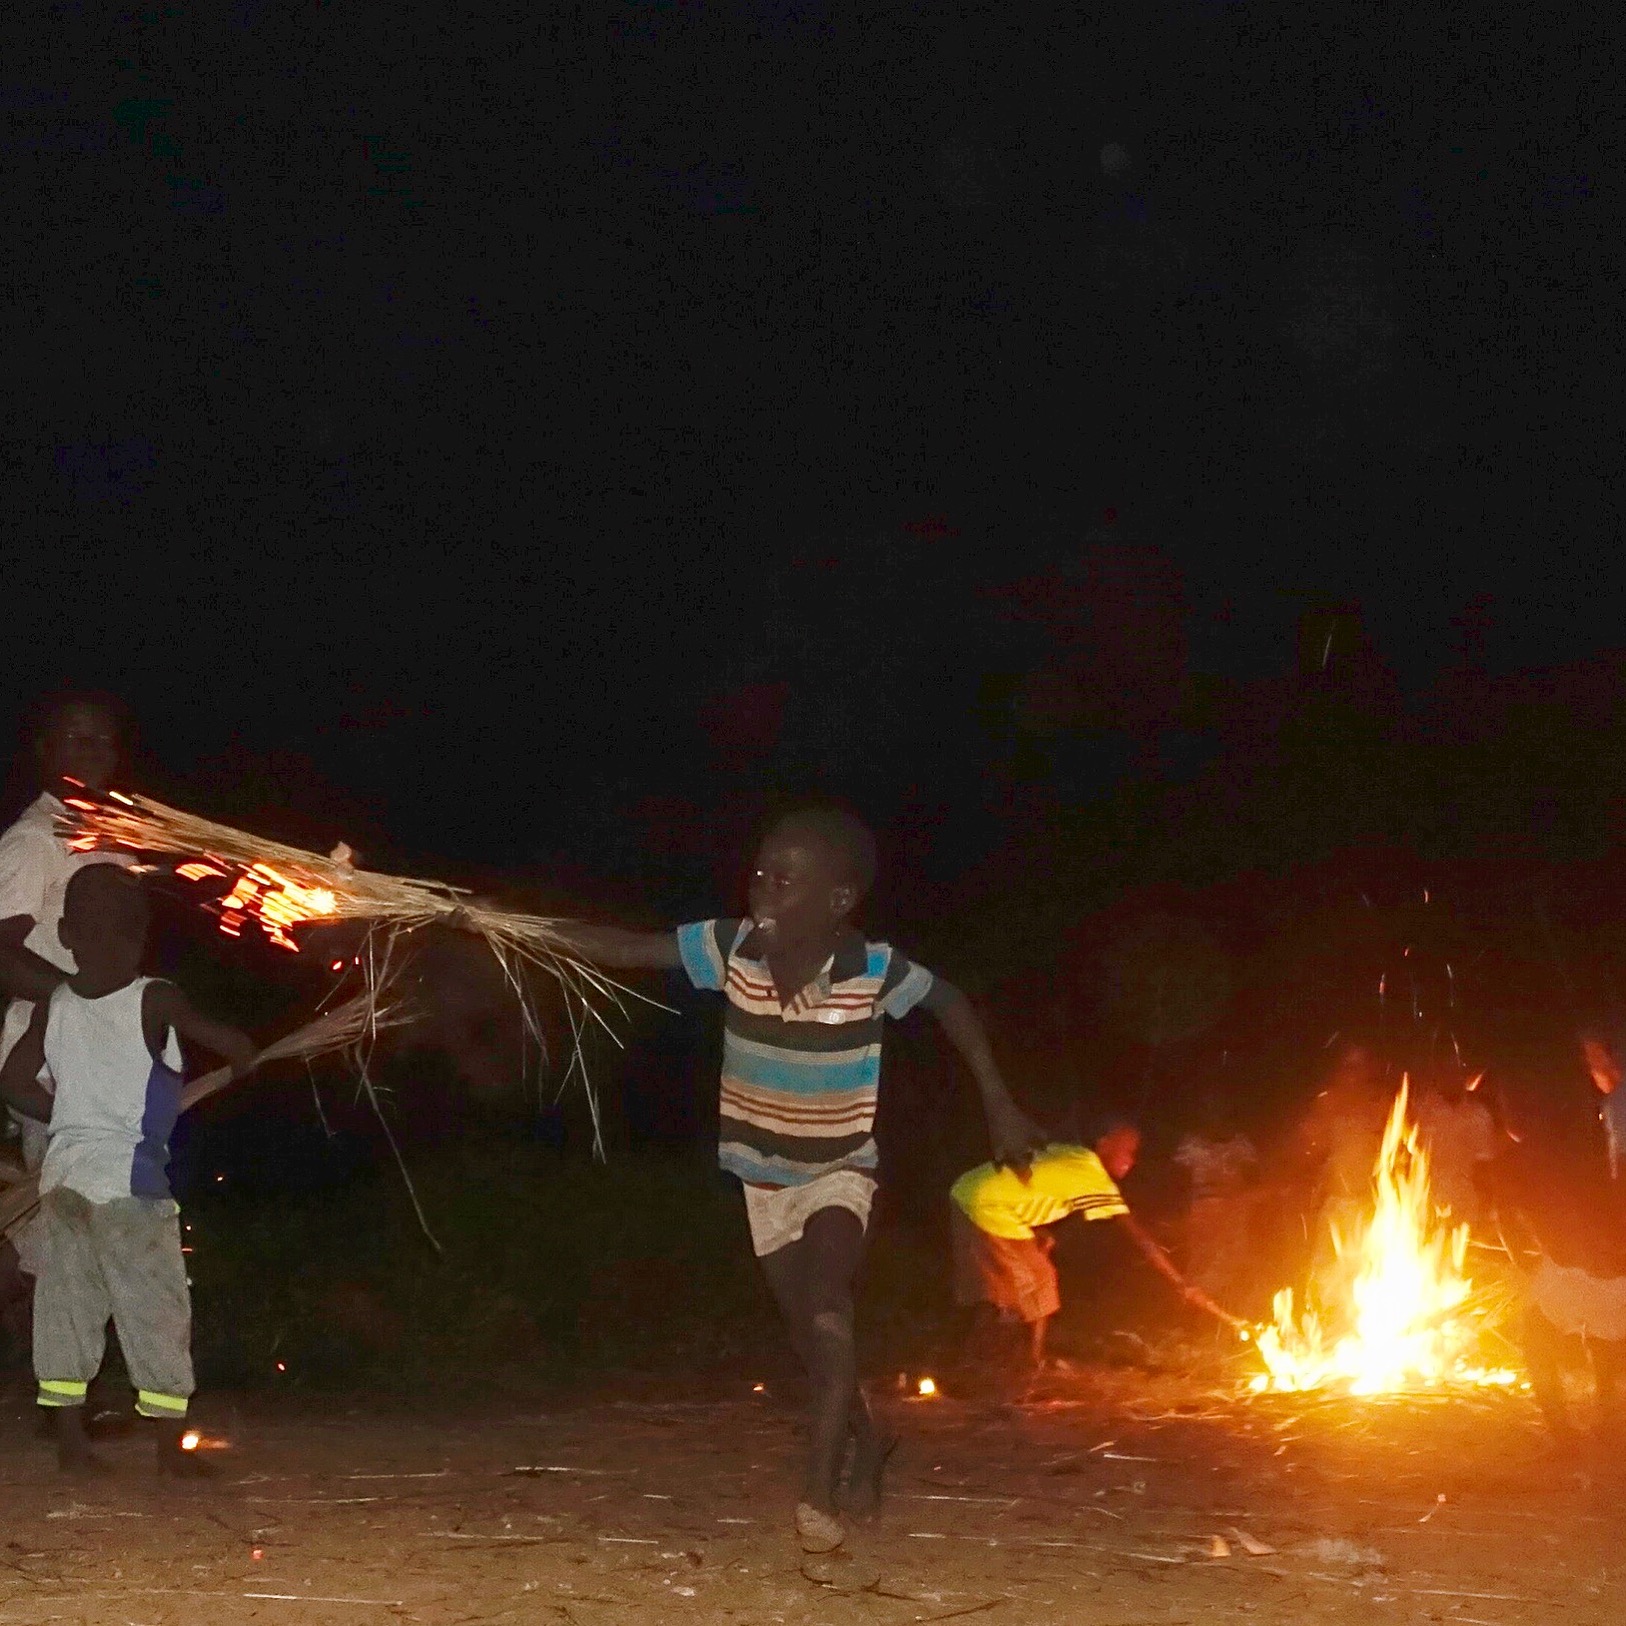 a small boy, holding a bundle of grass that is lit on fire runs towards the camera and a fire burns in the background under a black sky